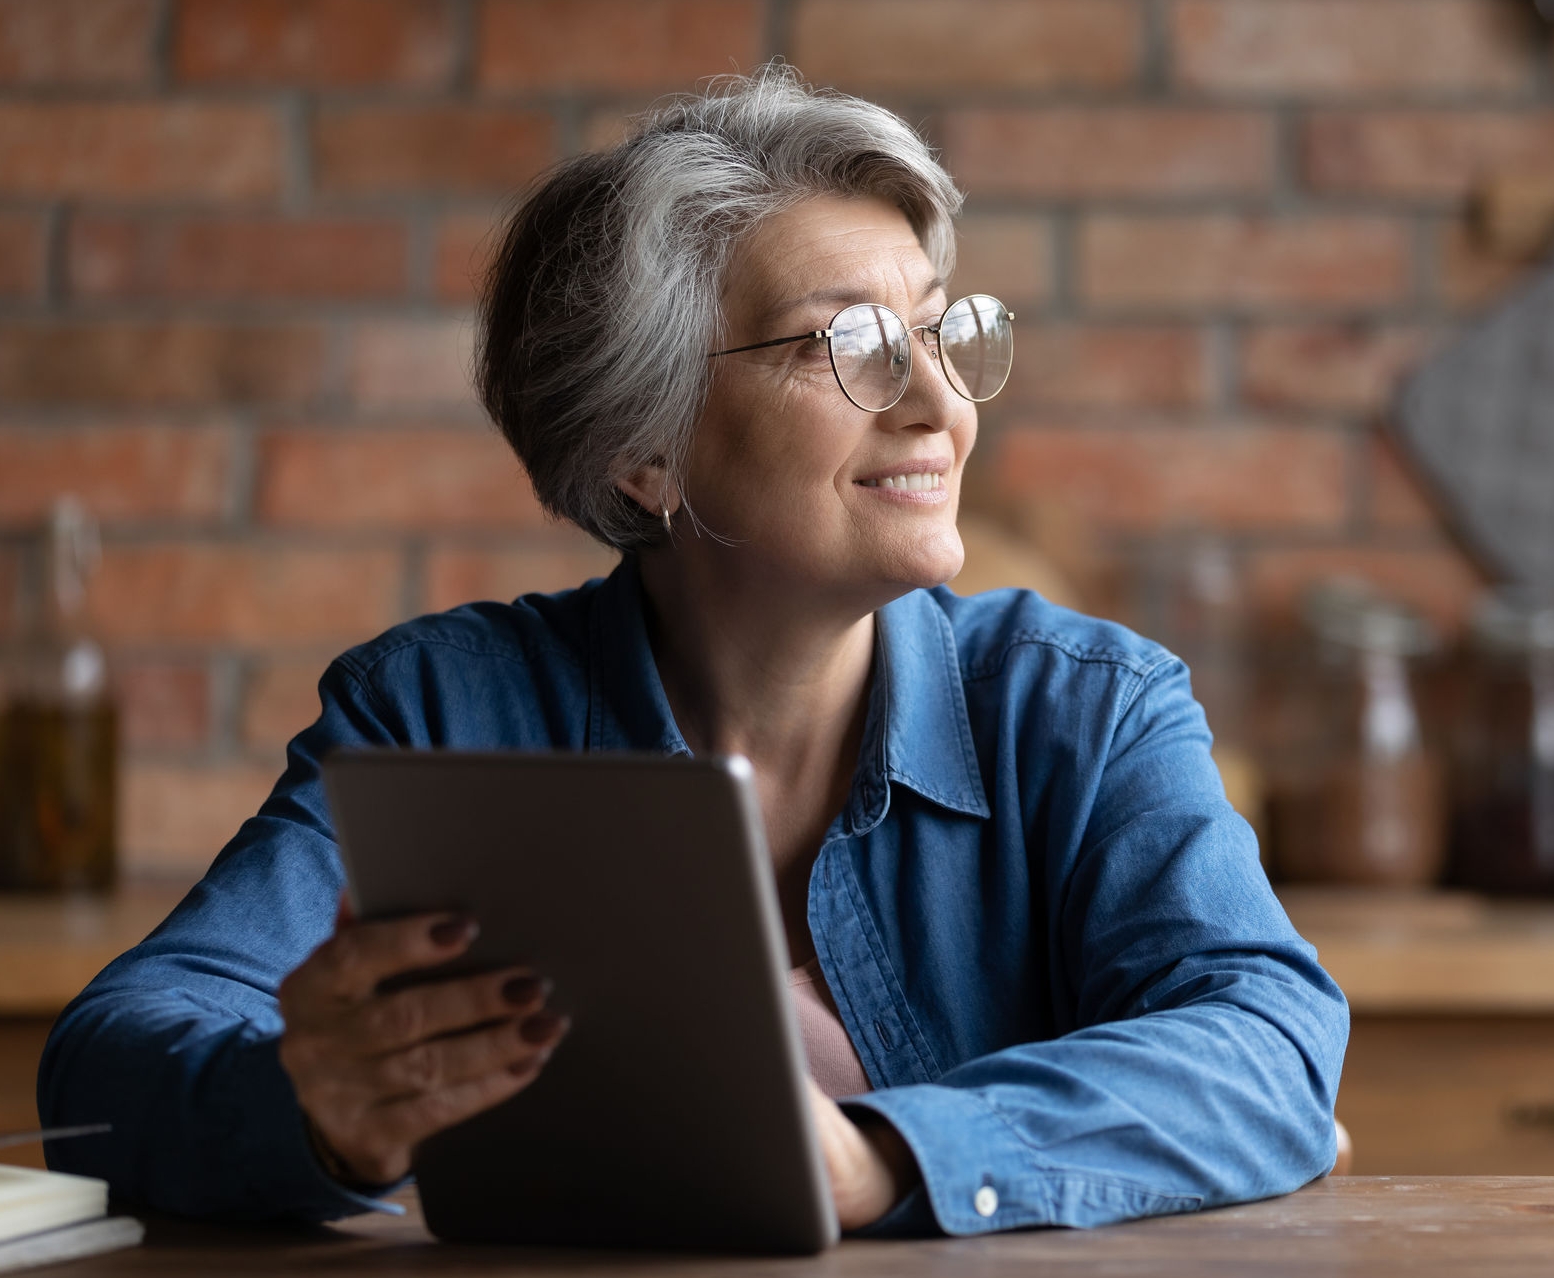 Dreamy senior grey haired woman in spectacles holding digital computer tablet in hands, looking in distance, copy space for advertising text of retired old people and modern technology easy usage.